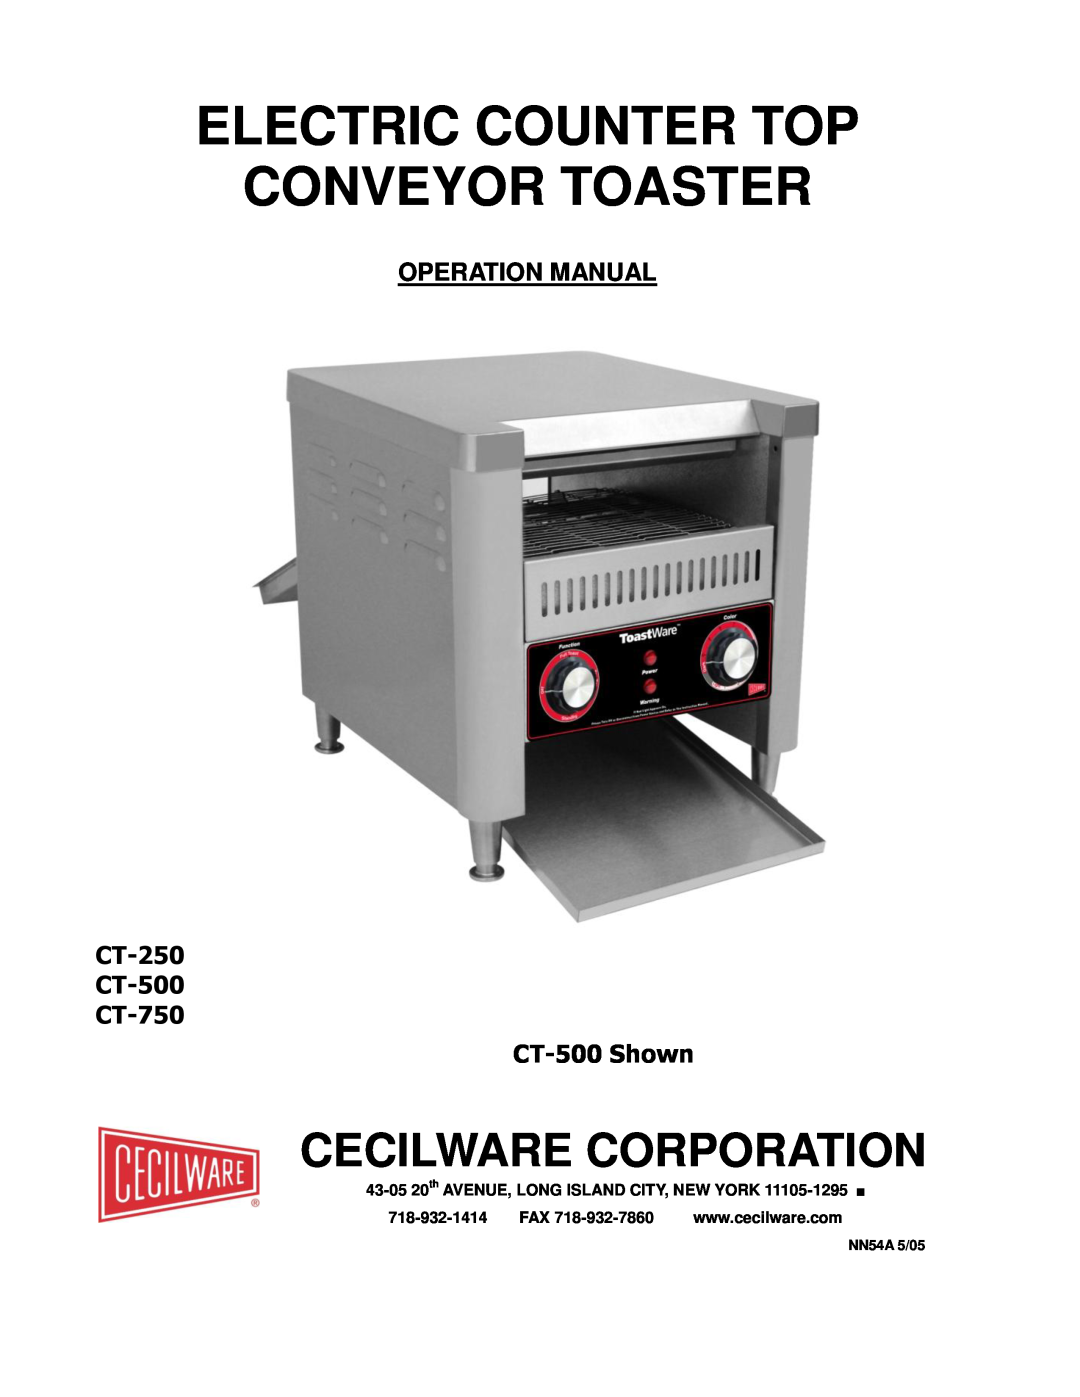 Cecilware CT-500, CT-250, CT-750 operation manual Cecilware Corporation, Electric Counter Top Conveyor Toaster, NN54A 5/05 